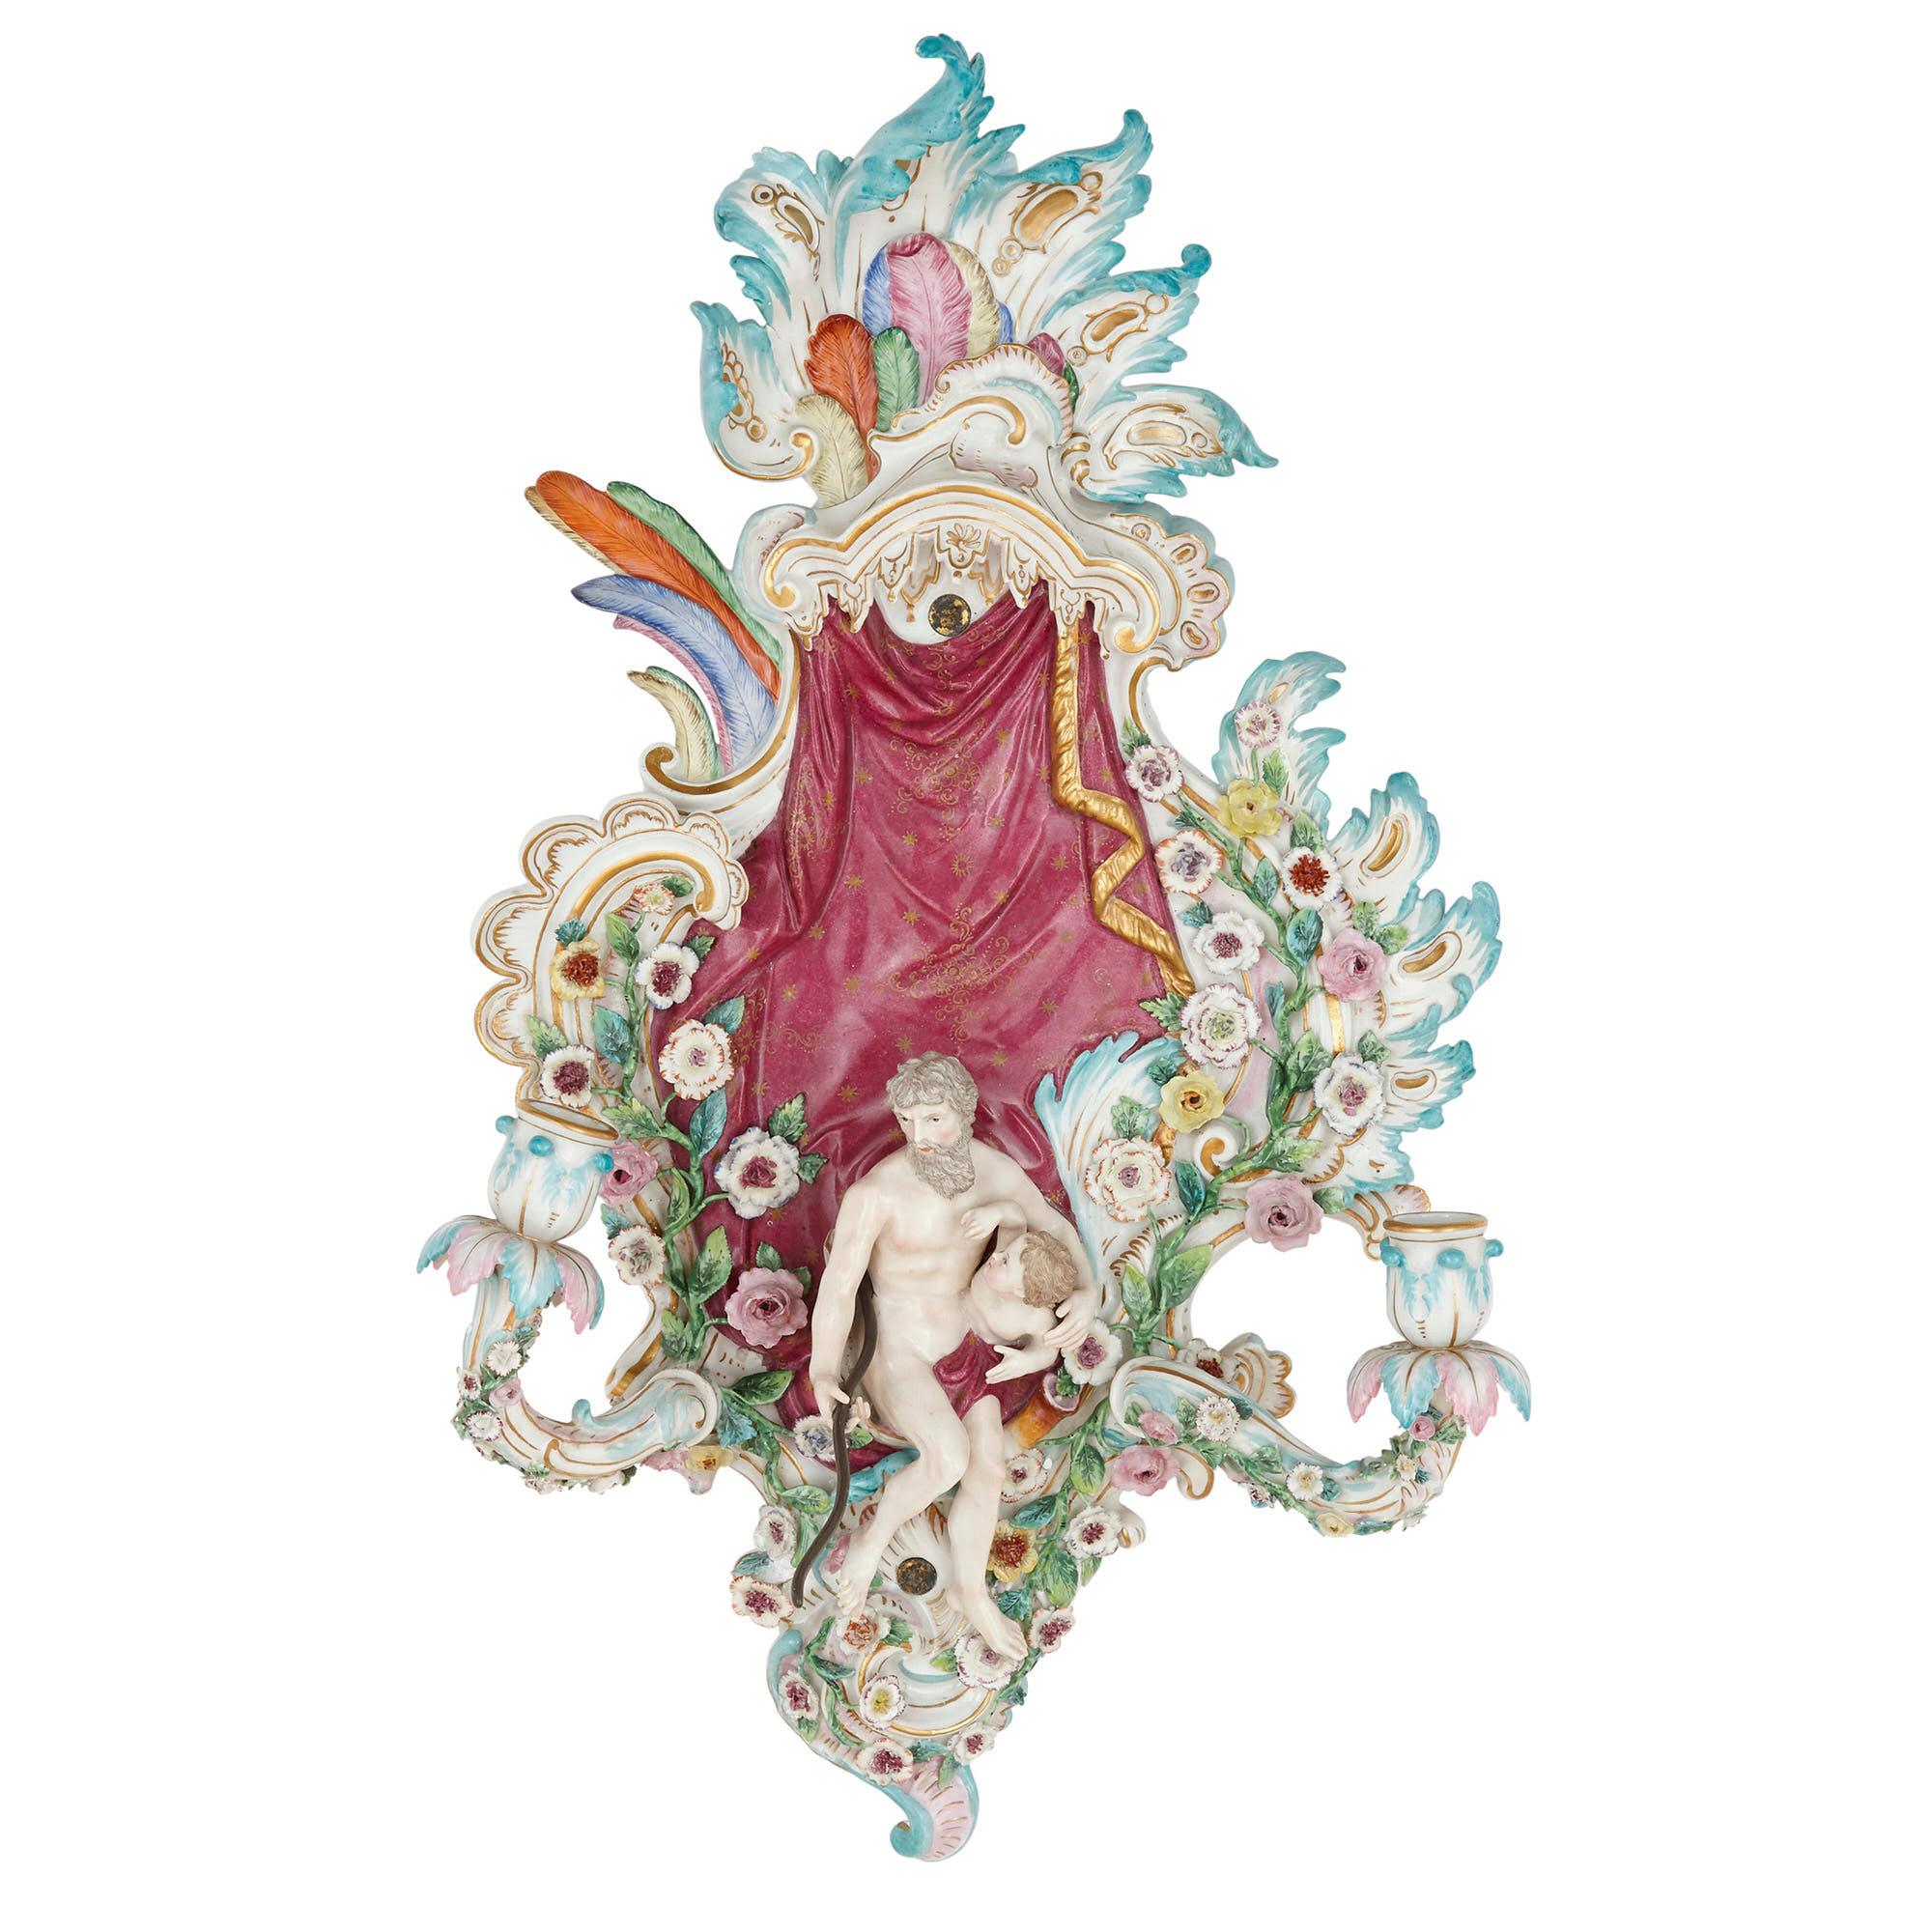 This exquisite pair of German Rococo style Meissen sconces feature beautifully encrusted porcelain flowers and petals and exceptionally finely hand painted passages. In their unmatched quality, the pair epitomises the very best of the Meissen